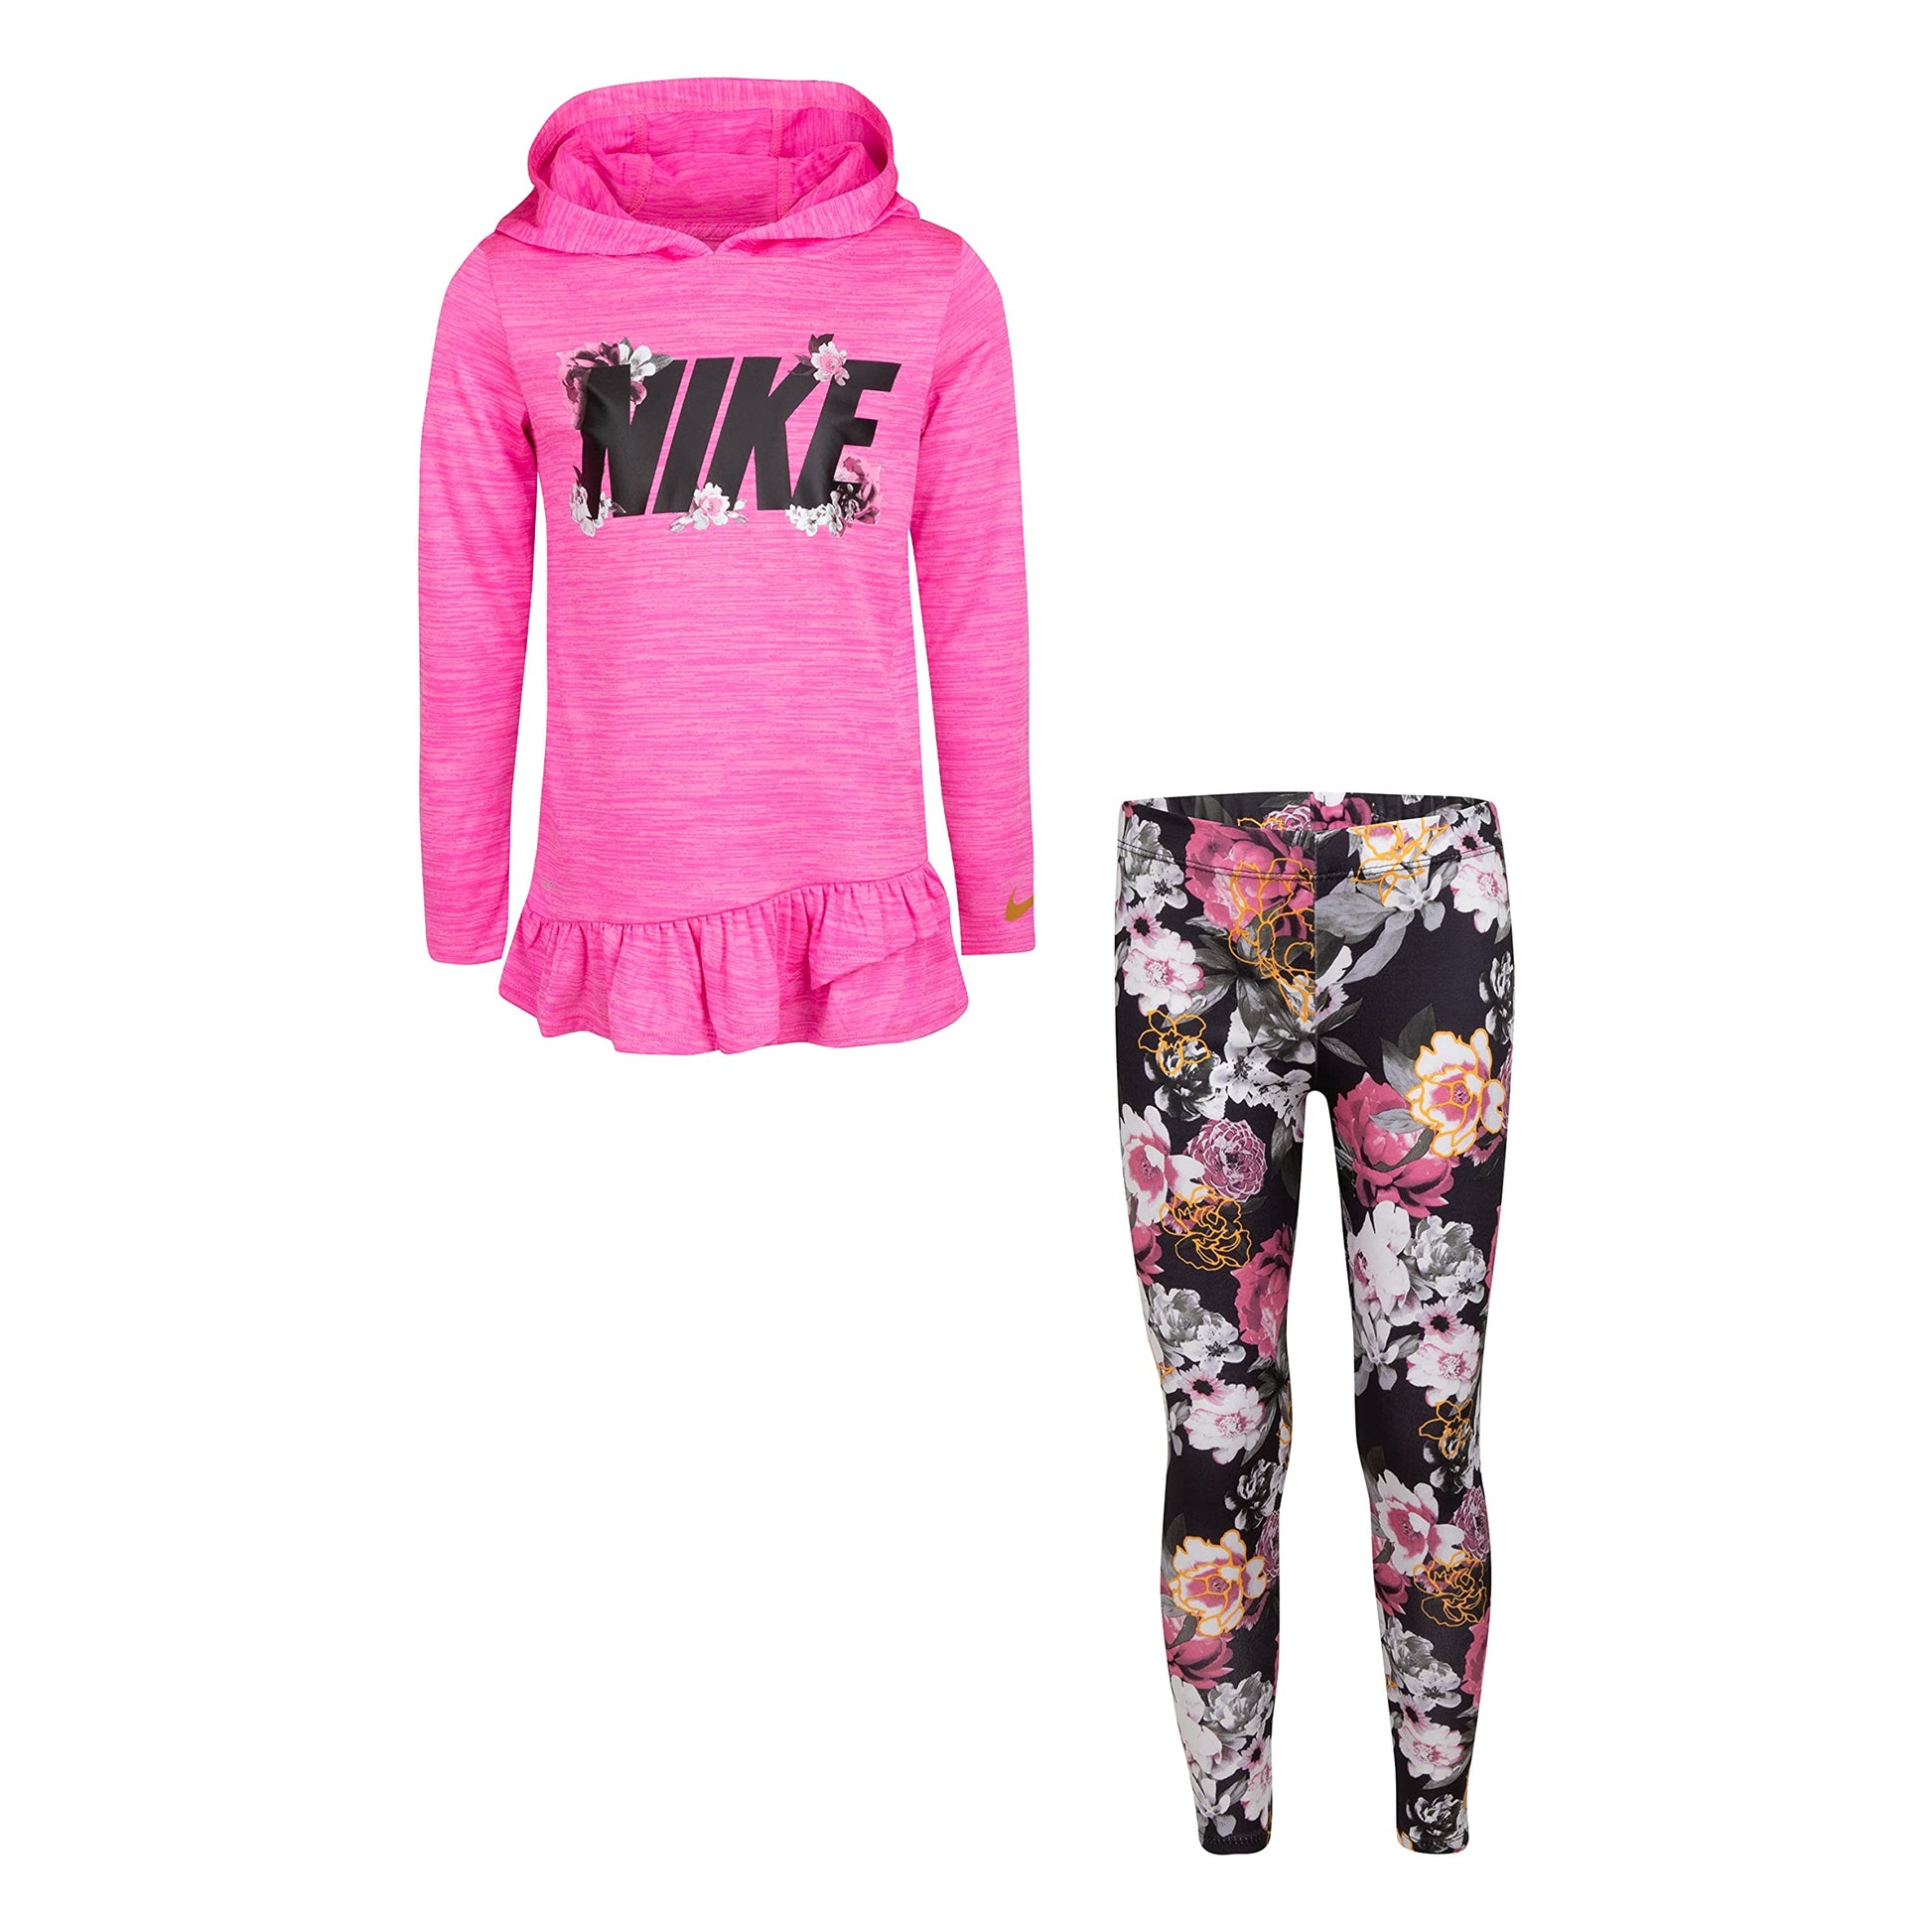 Image 1 of Dri-FIT™ Hooded Tunic and Leggings Set (Little Kids)